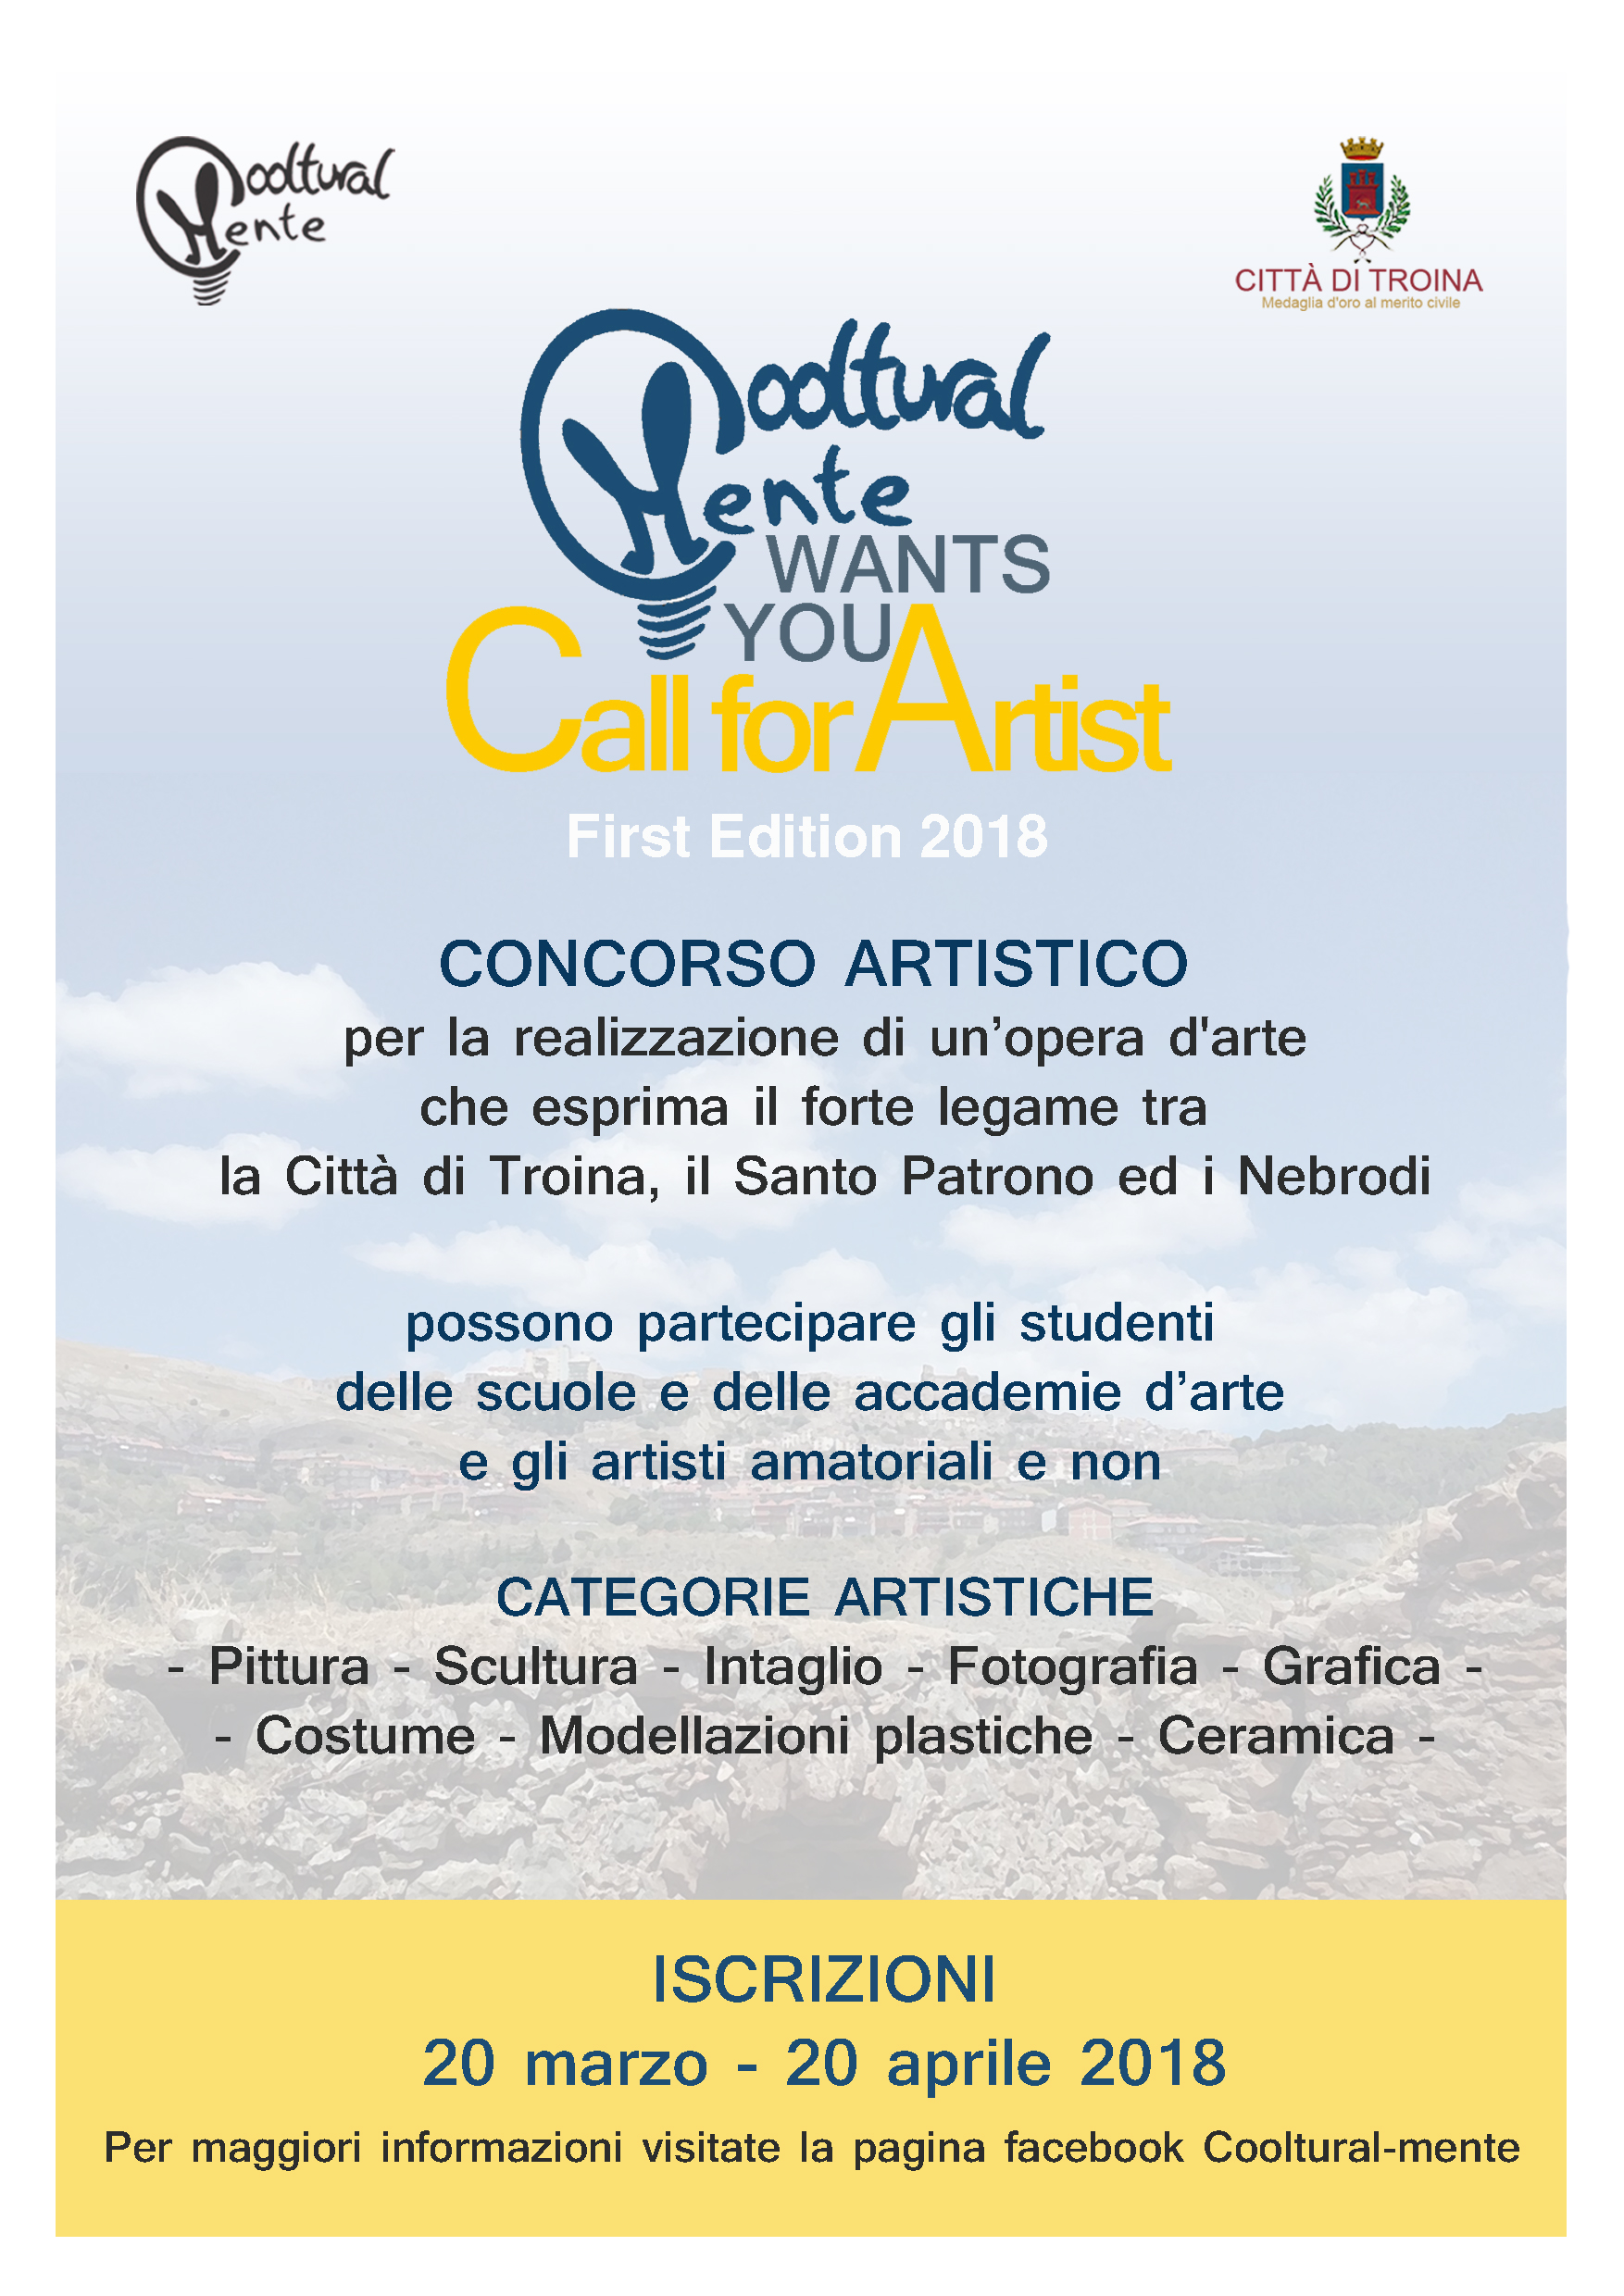 COOLTURAL-MENTE WANTS YOU: call for Artist 2018